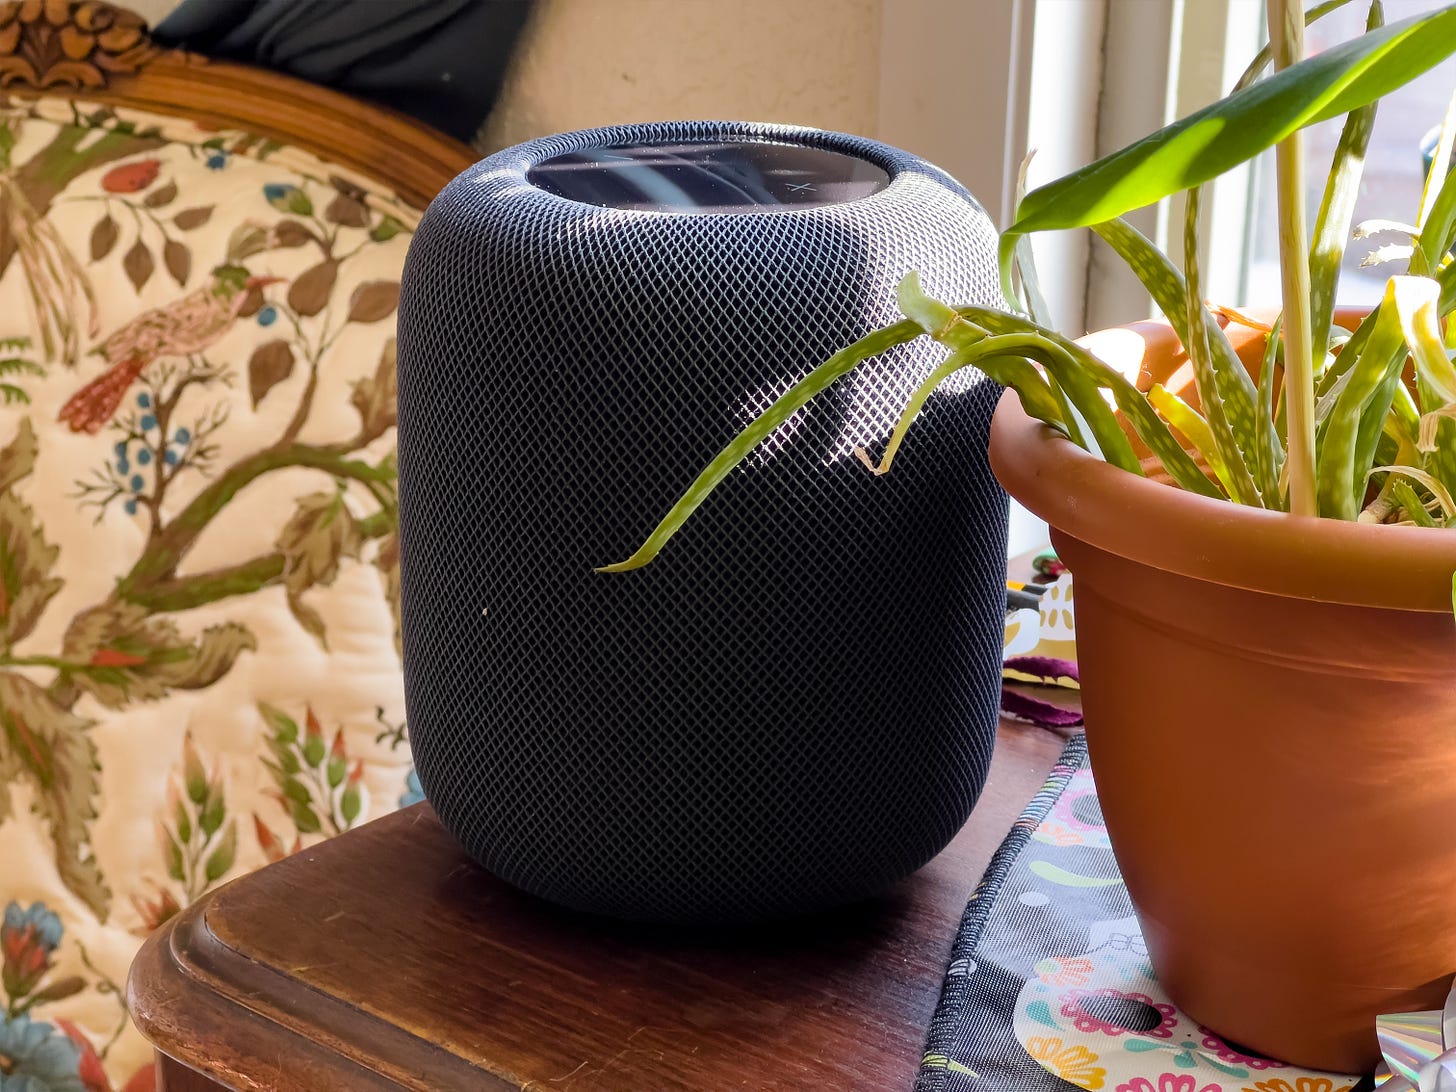 A HomePod 2 sitting next to a plant